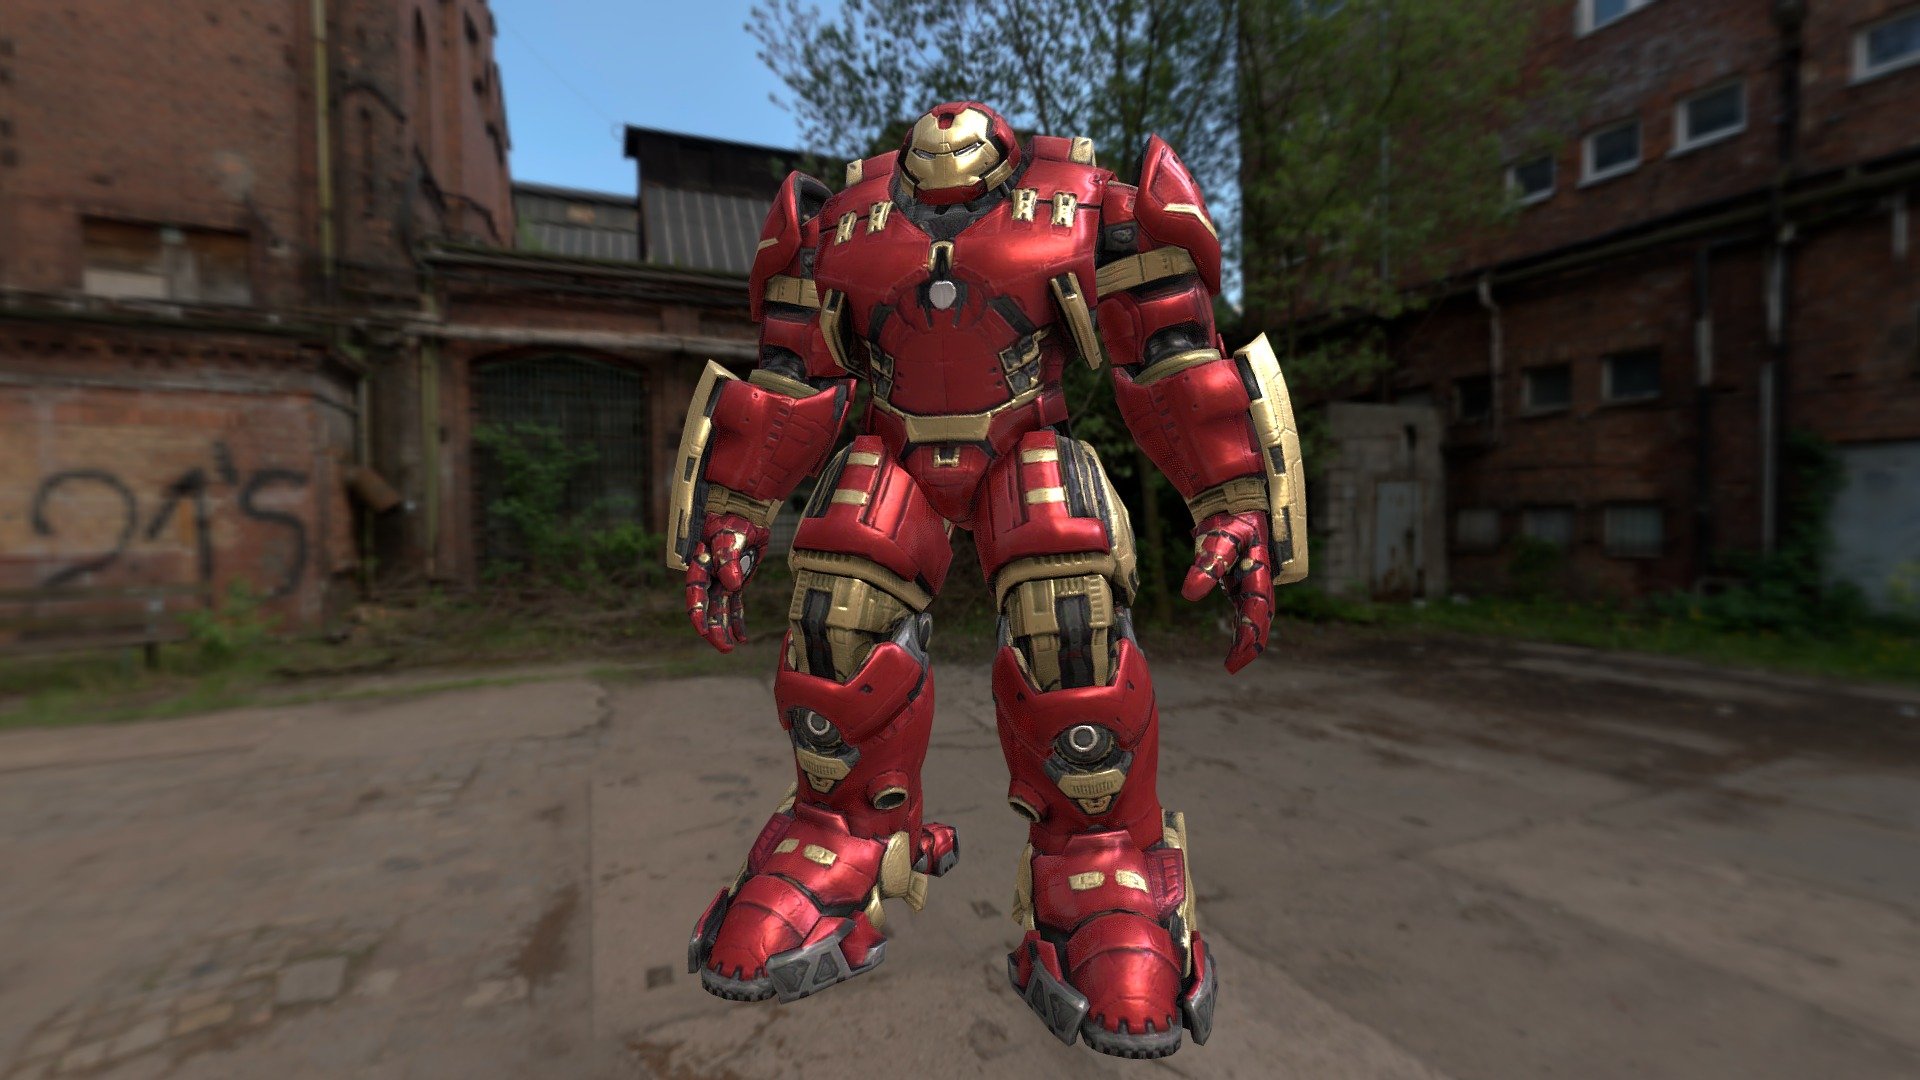 [EDITED][ANIMATORS WANTED!!! I would love for this model to be posed! Anybody willing to work with this model, comment and I will send you a private file. Thanks!]
This is the only compatible file I could find on my computer for now but please enjoy, share and don't be afraid to comment! I'd love your feedback! - Hulkbuster (MK XLIV) - 3D model by Wyatt Thayne (@wyattmail) 3d model